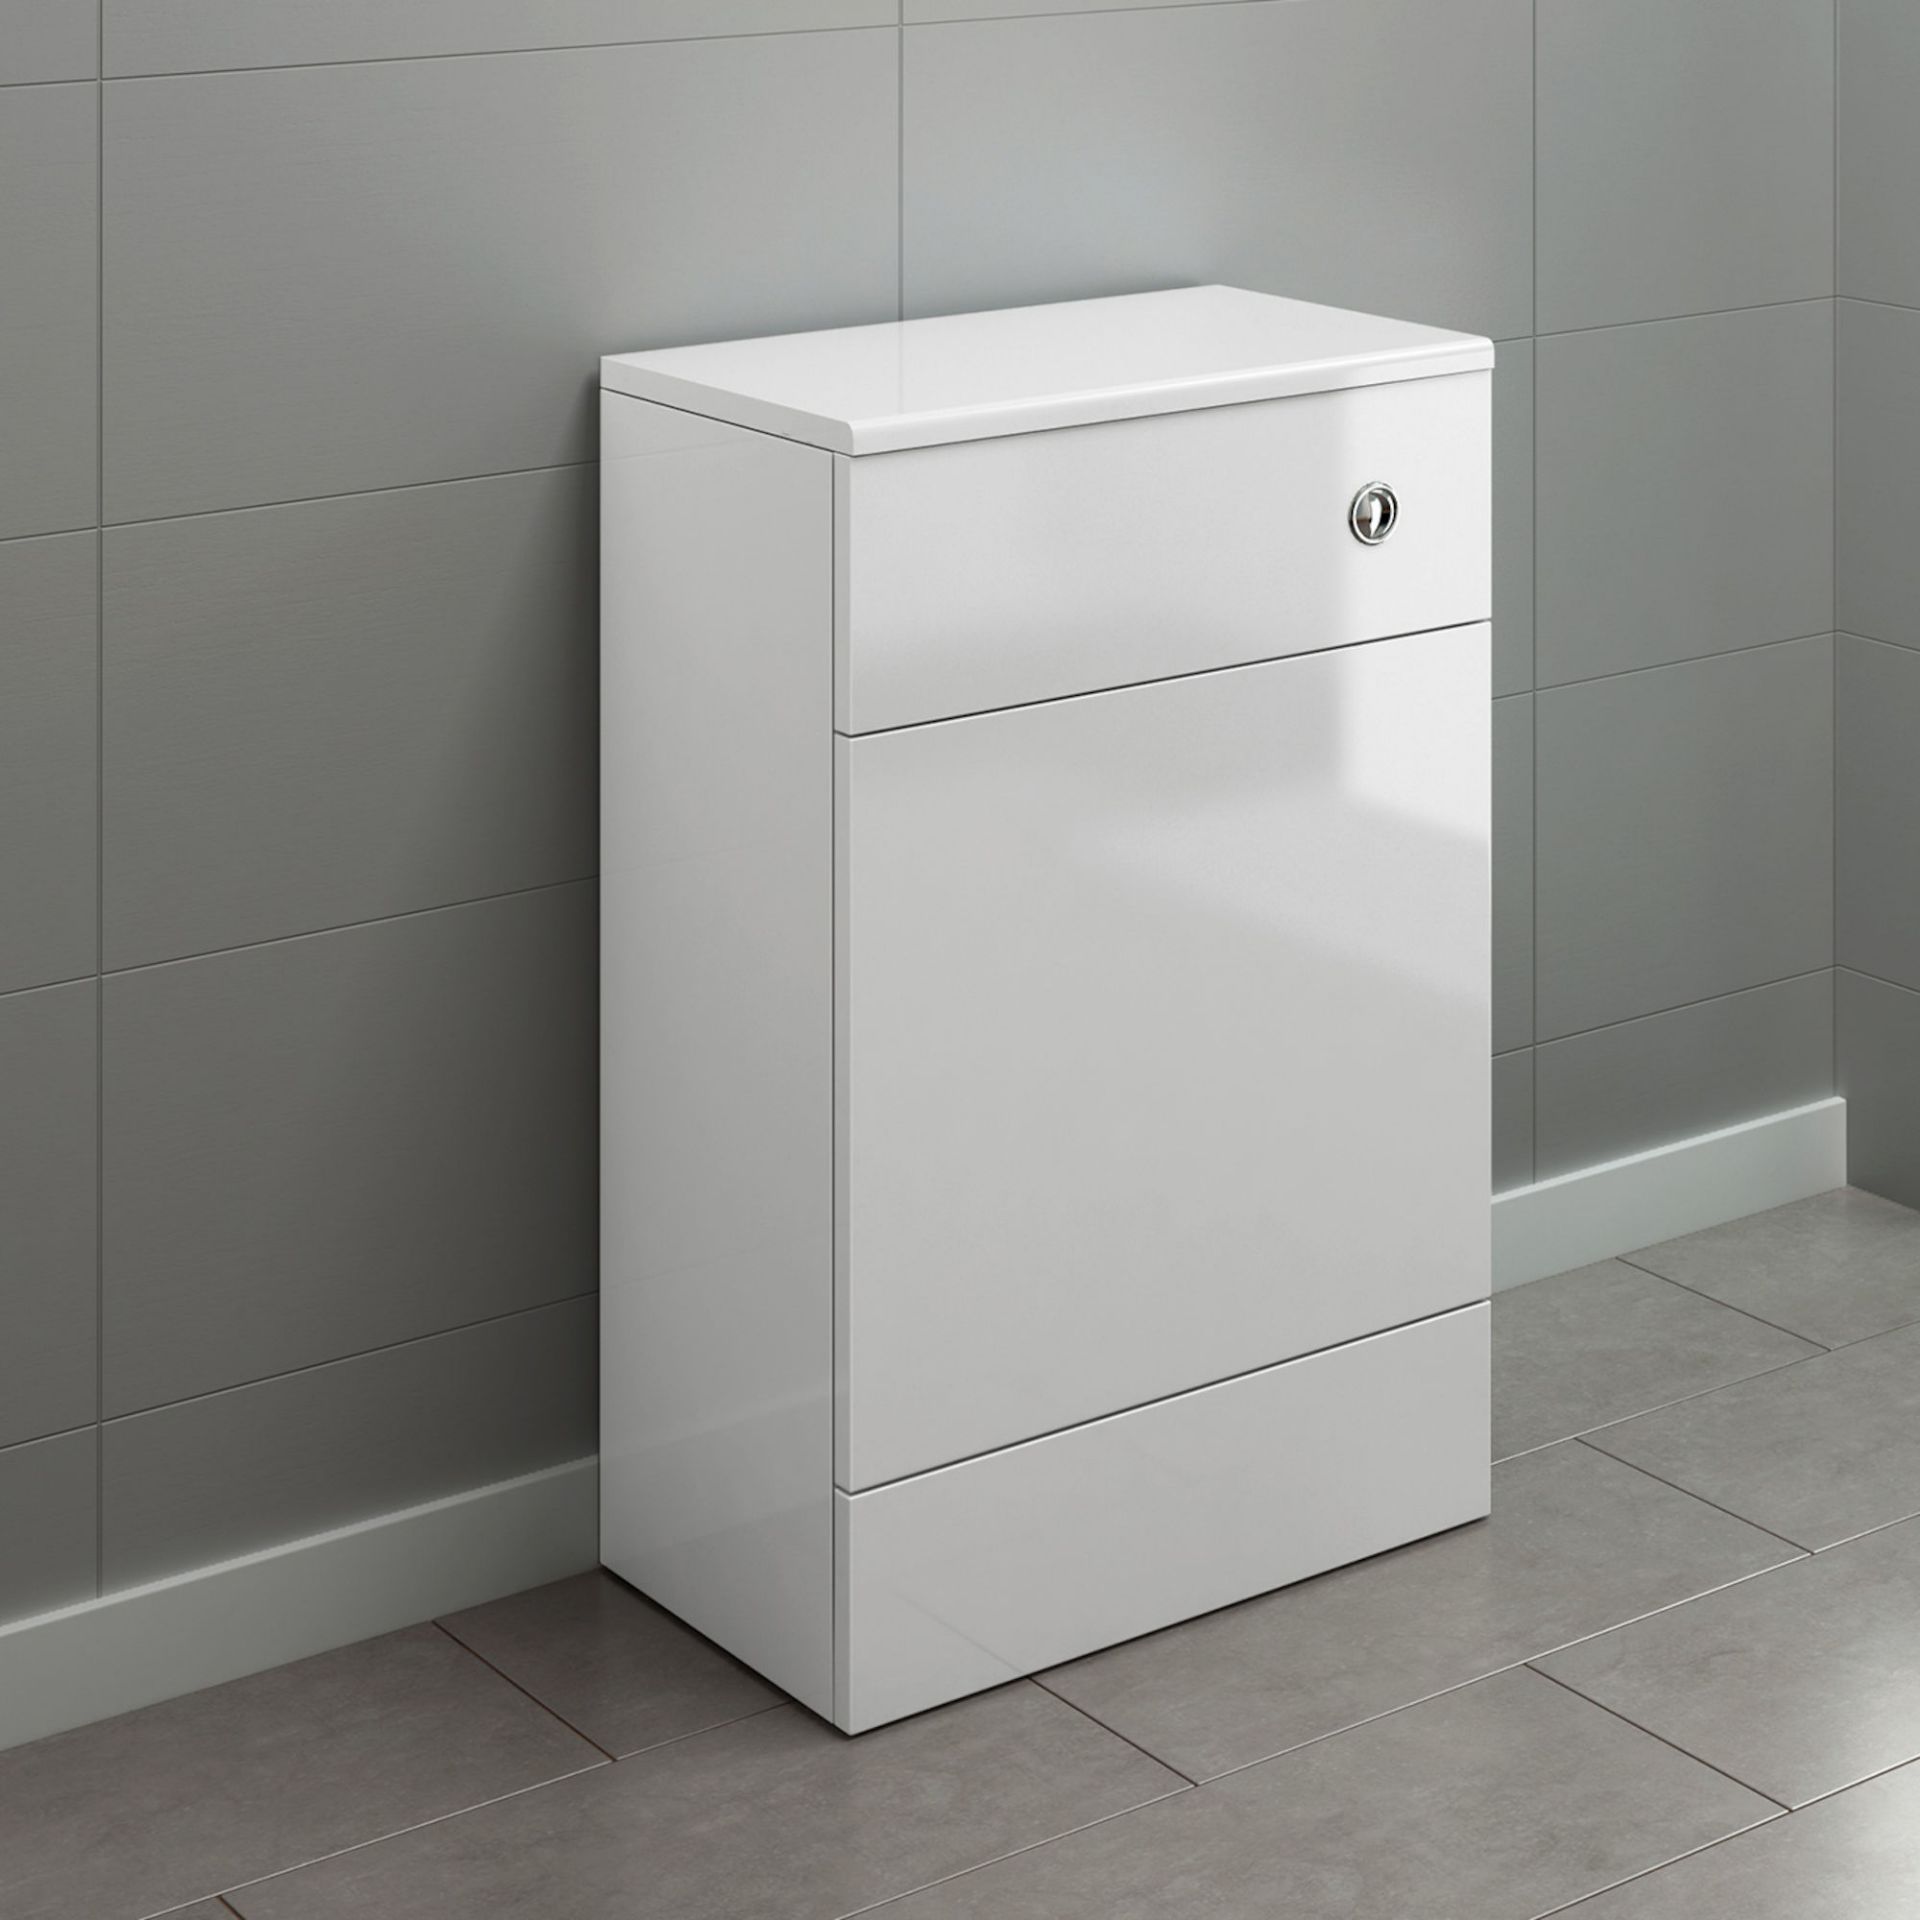 (SP53) 500mm Harper Gloss White Back To Wall Toilet Unit. RRP £119.99. Our discreet unit cleverly